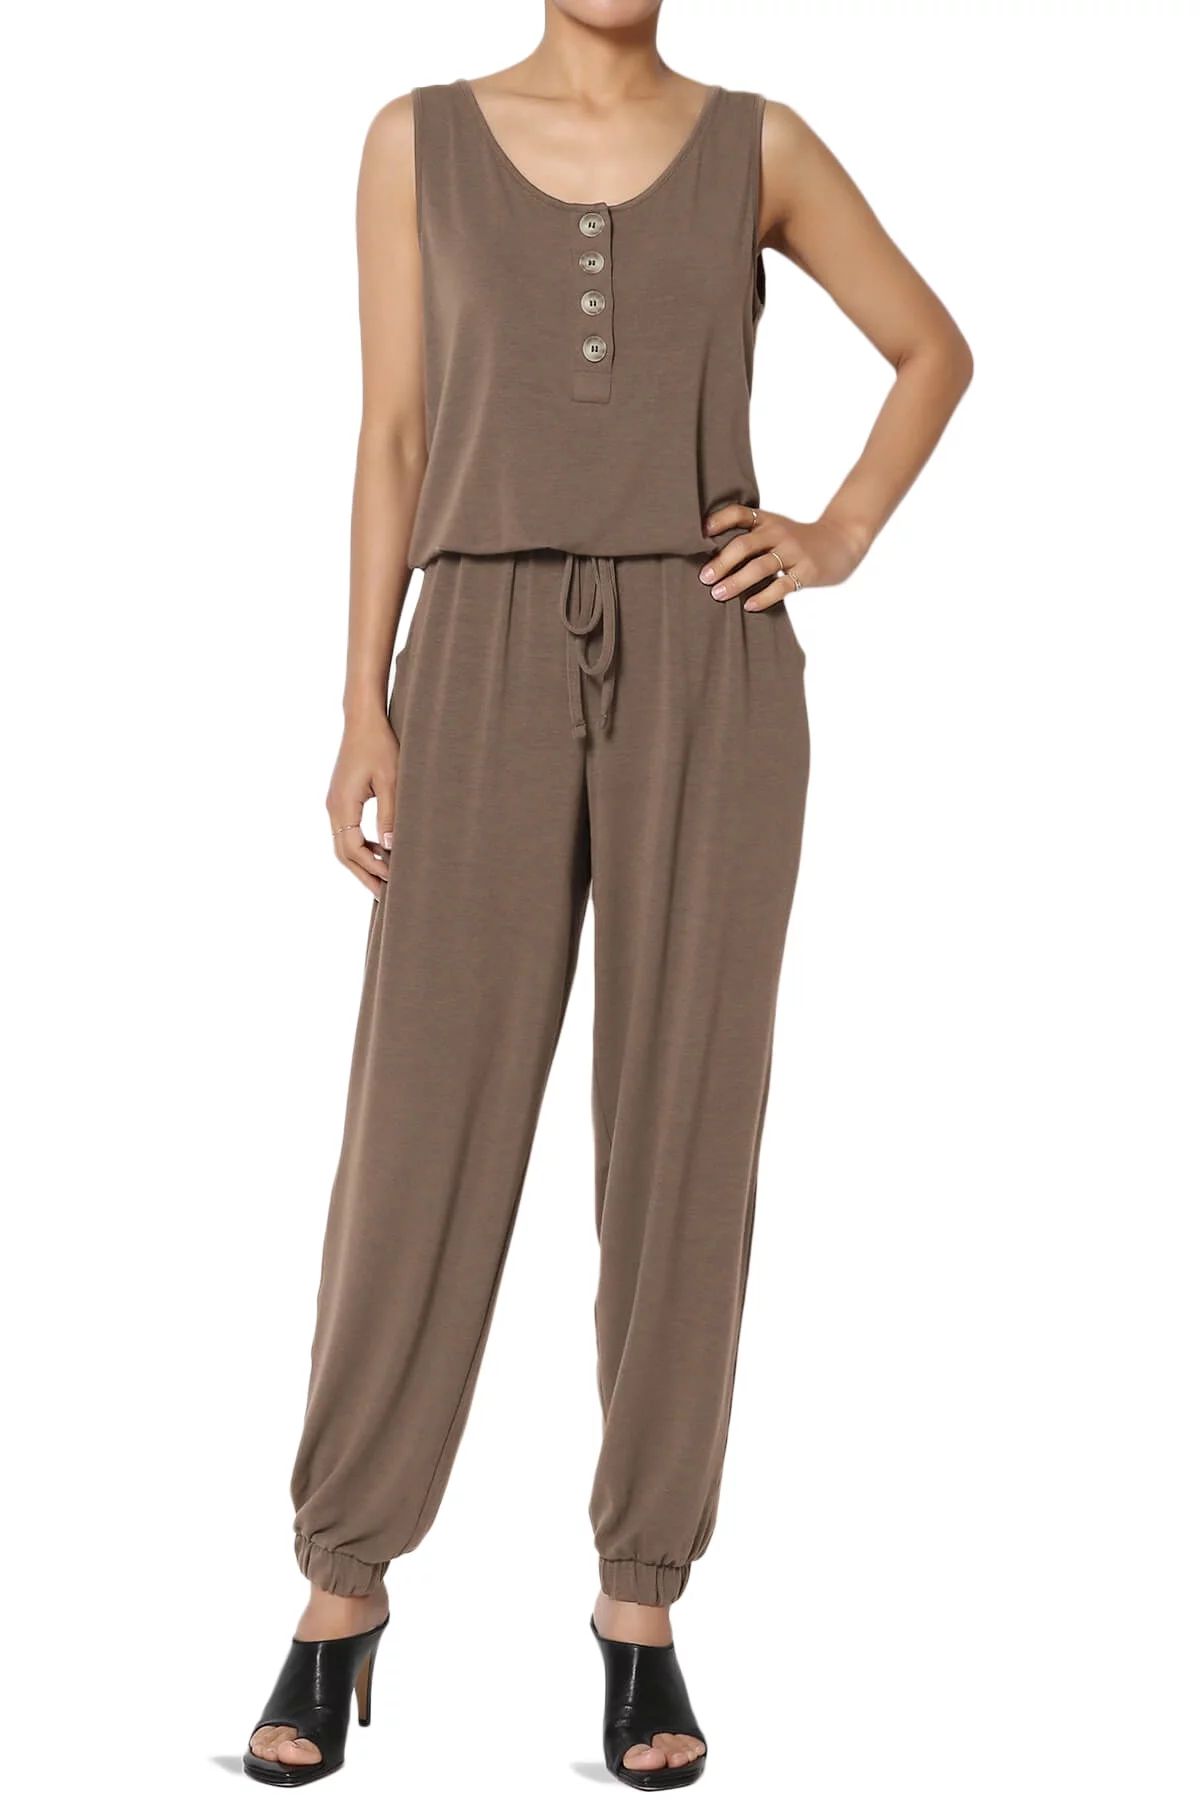 Women's Casual Sleeveless Button Up Scoop Neck Tapered Leg Knit Jogger Jumpsuit | Walmart (US)